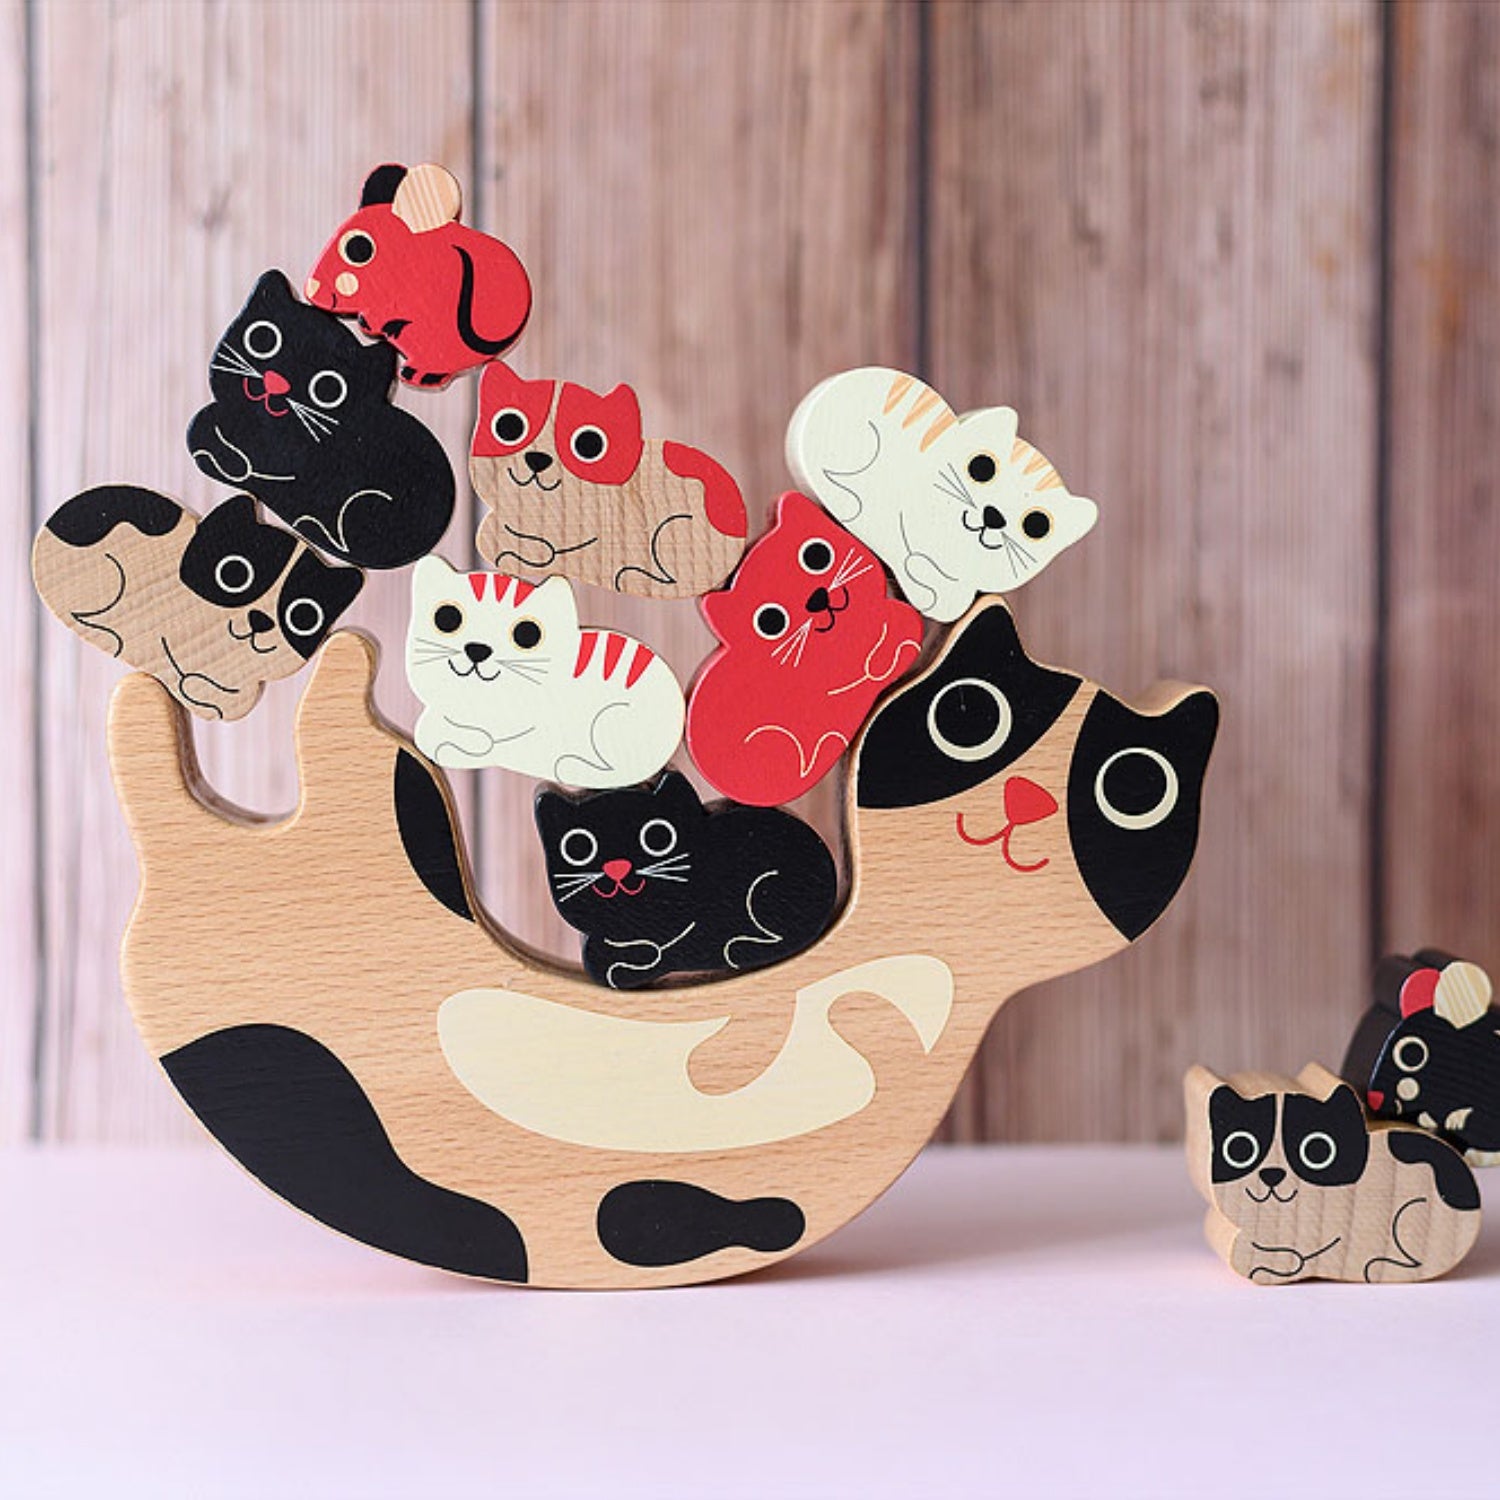 Vilac Catymini Balancing Game Designed by Ingela P. Arrhenius  | Hand-Crafted Wooden Toy | Wooden Stacking Balancing Game | Front View – Lifestyle – Some Kittens on Mother Cat | BeoVERDE.ie